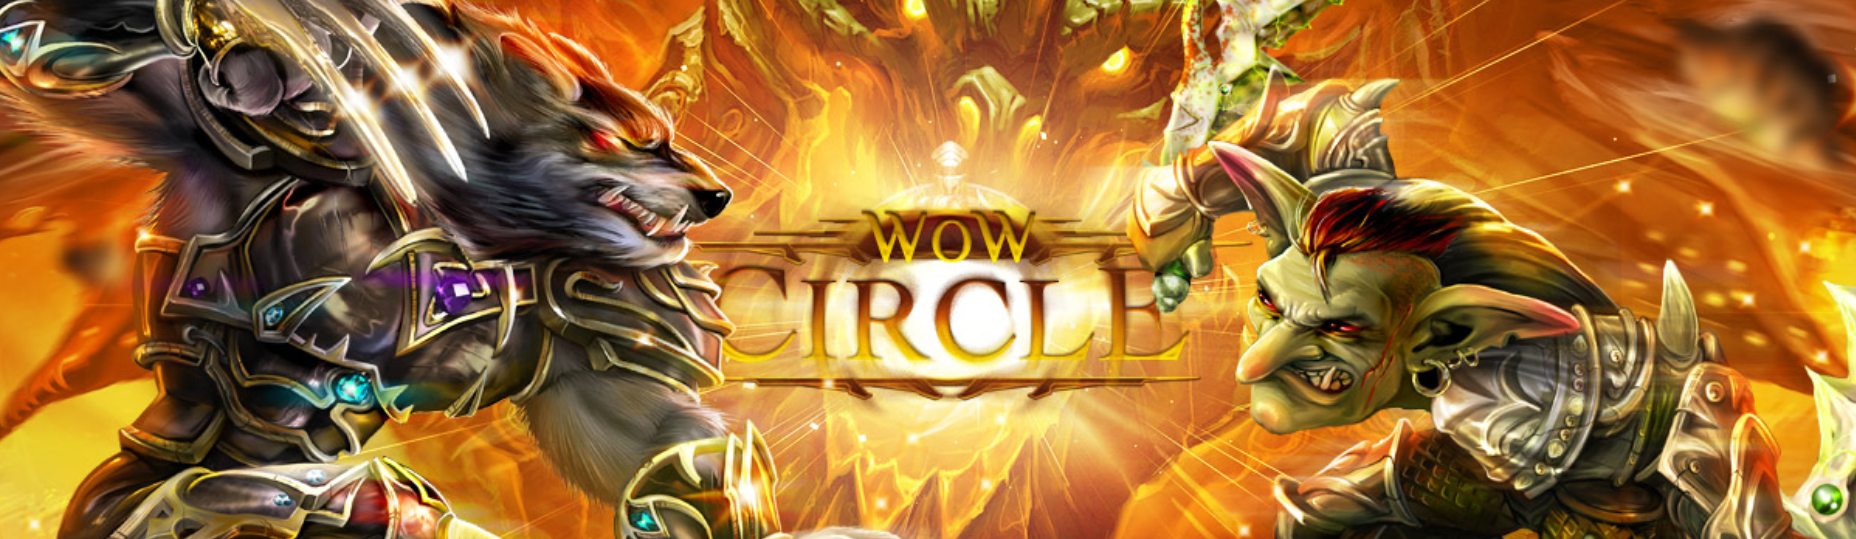 WOWCIRCLE GAME SERVER IN RUSSIA 